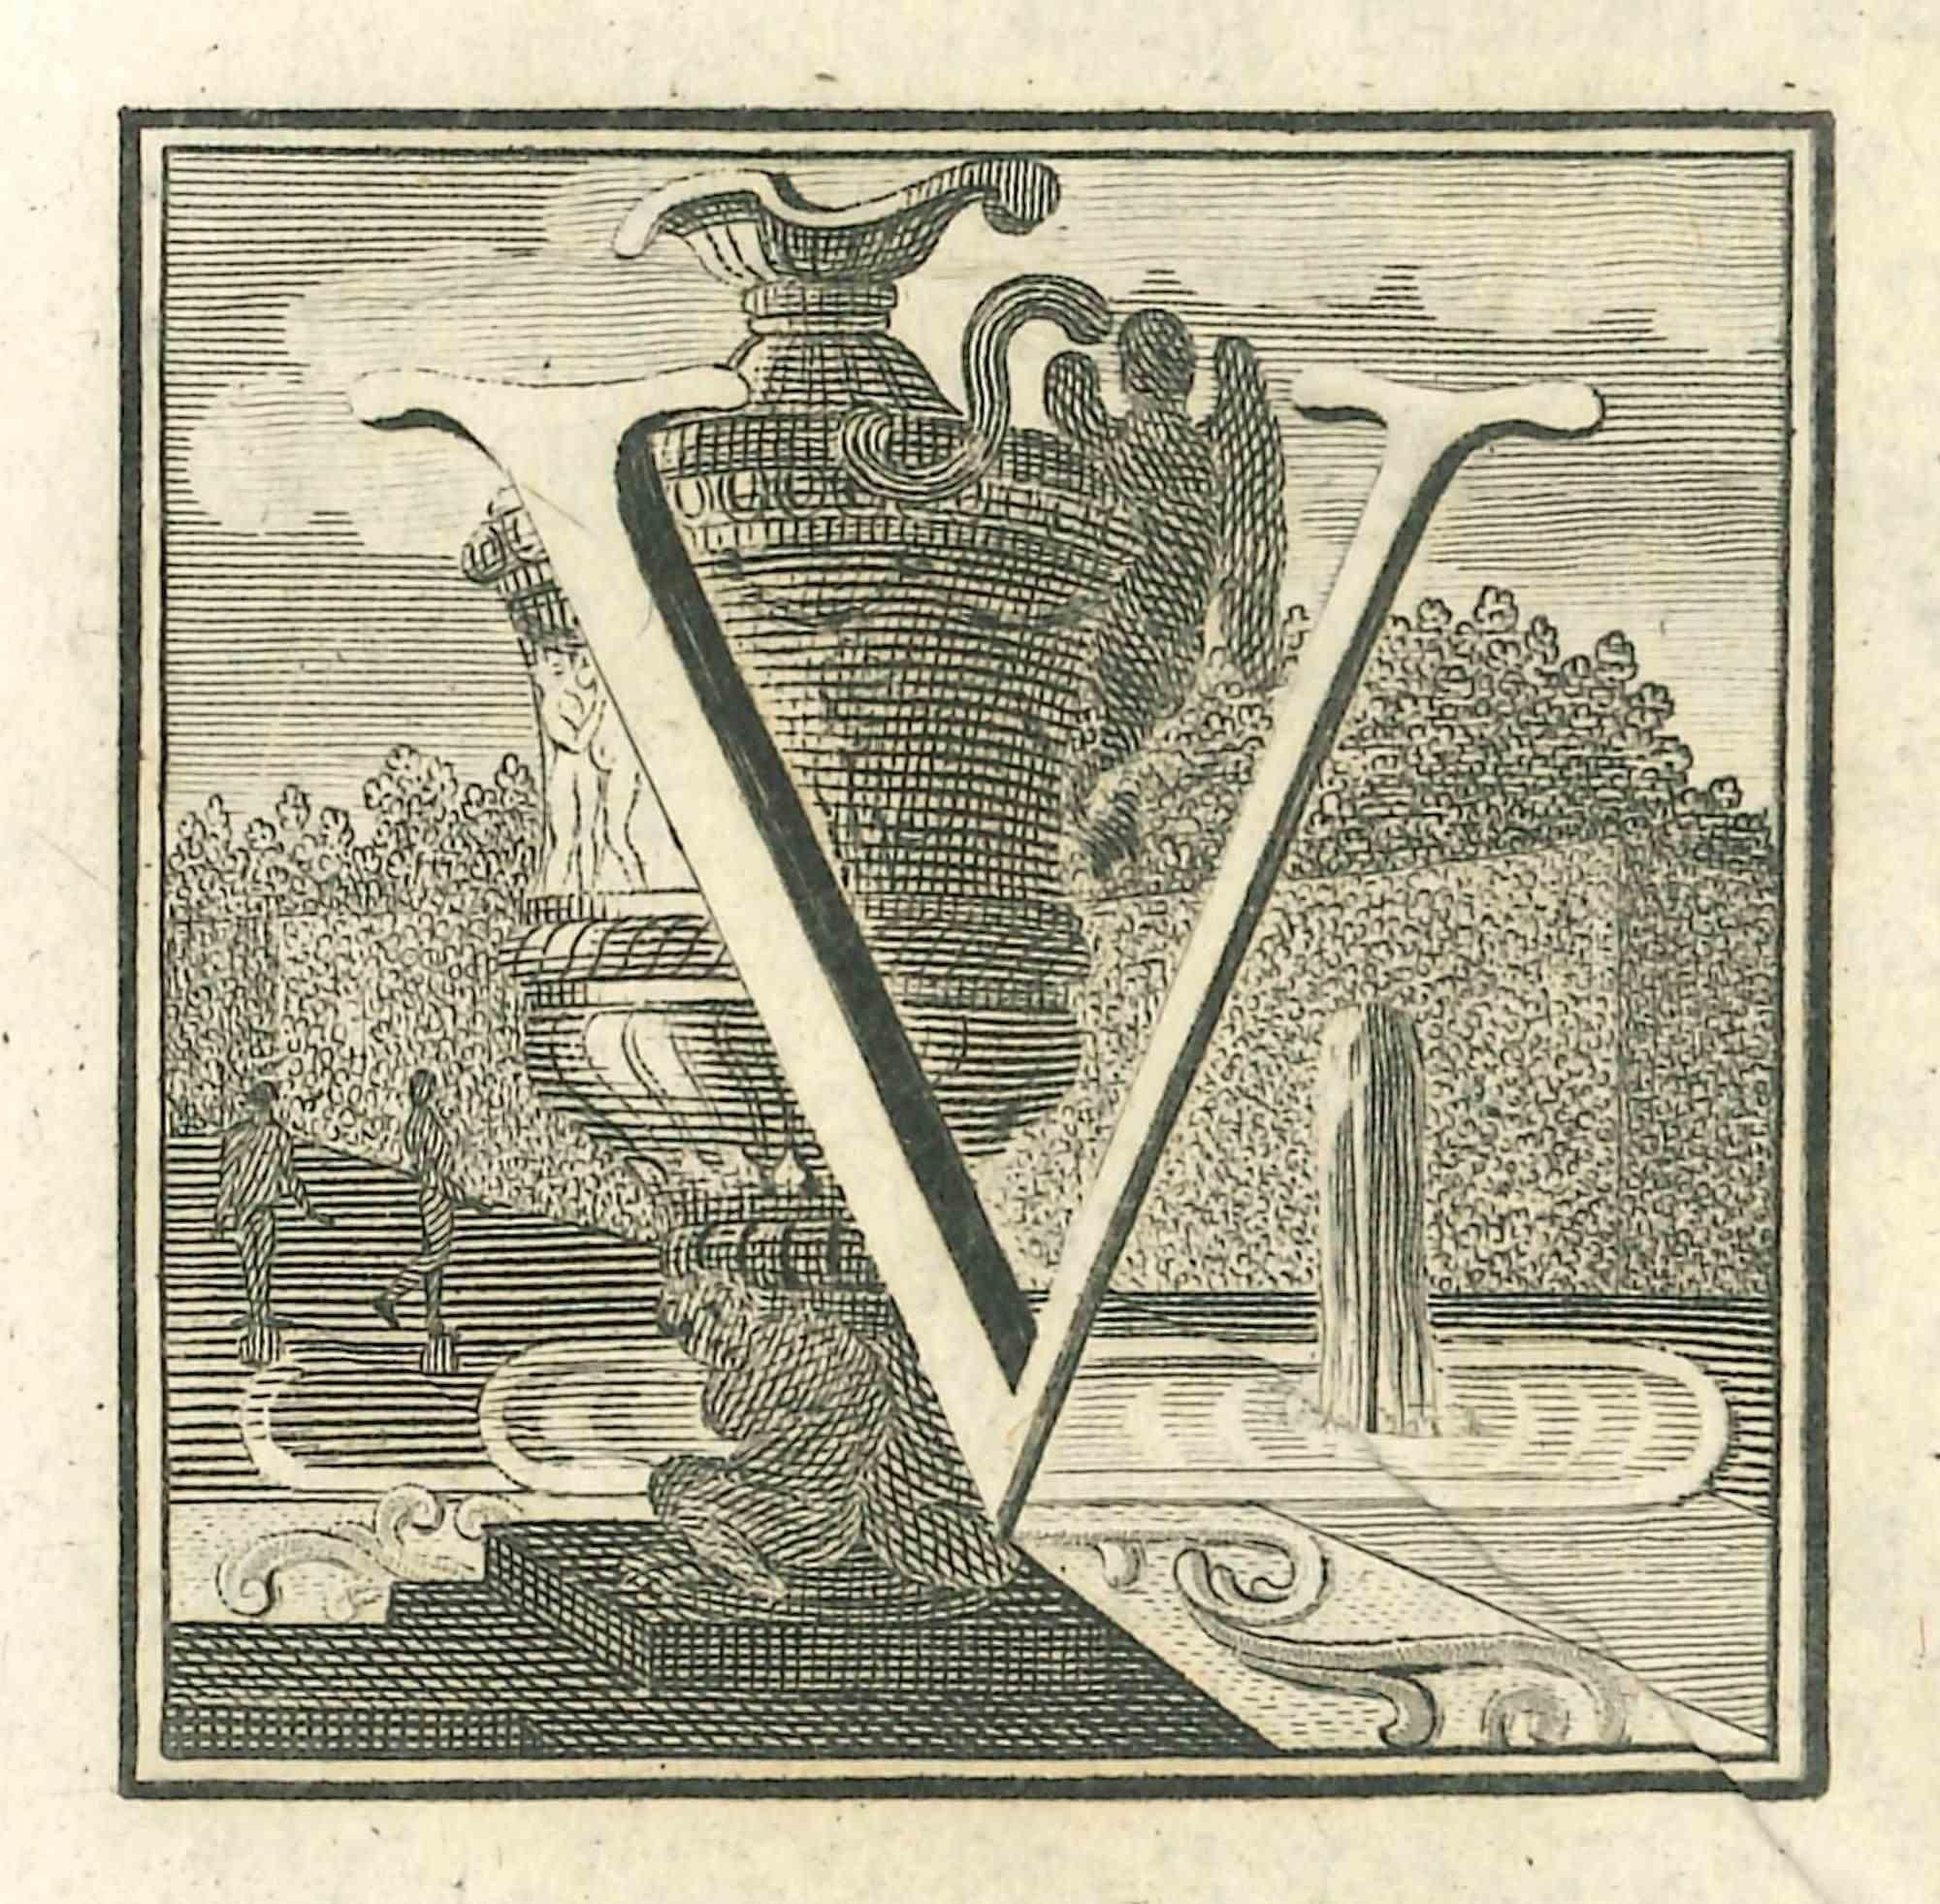 Letter V is an etching realized by Luigi Vanvitelli artist of 18th century.

The etching belongs to the print suite “Antiquities of Herculaneum Exposed” (original title: “Le Antichità di Ercolano Esposte”), an eight-volume volume of engravings of